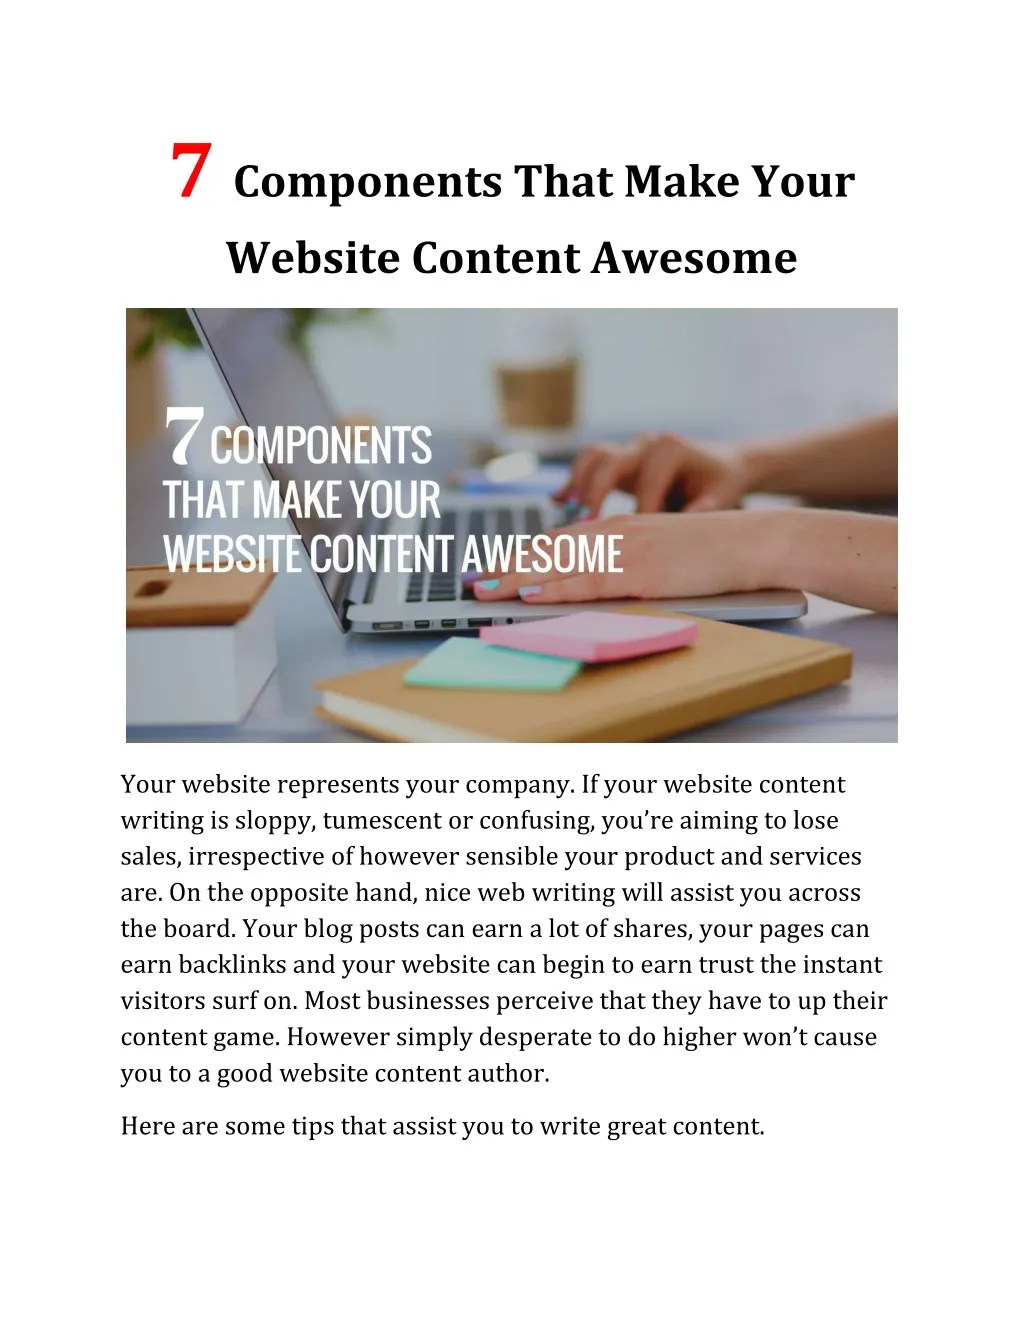 7 components that make your website content